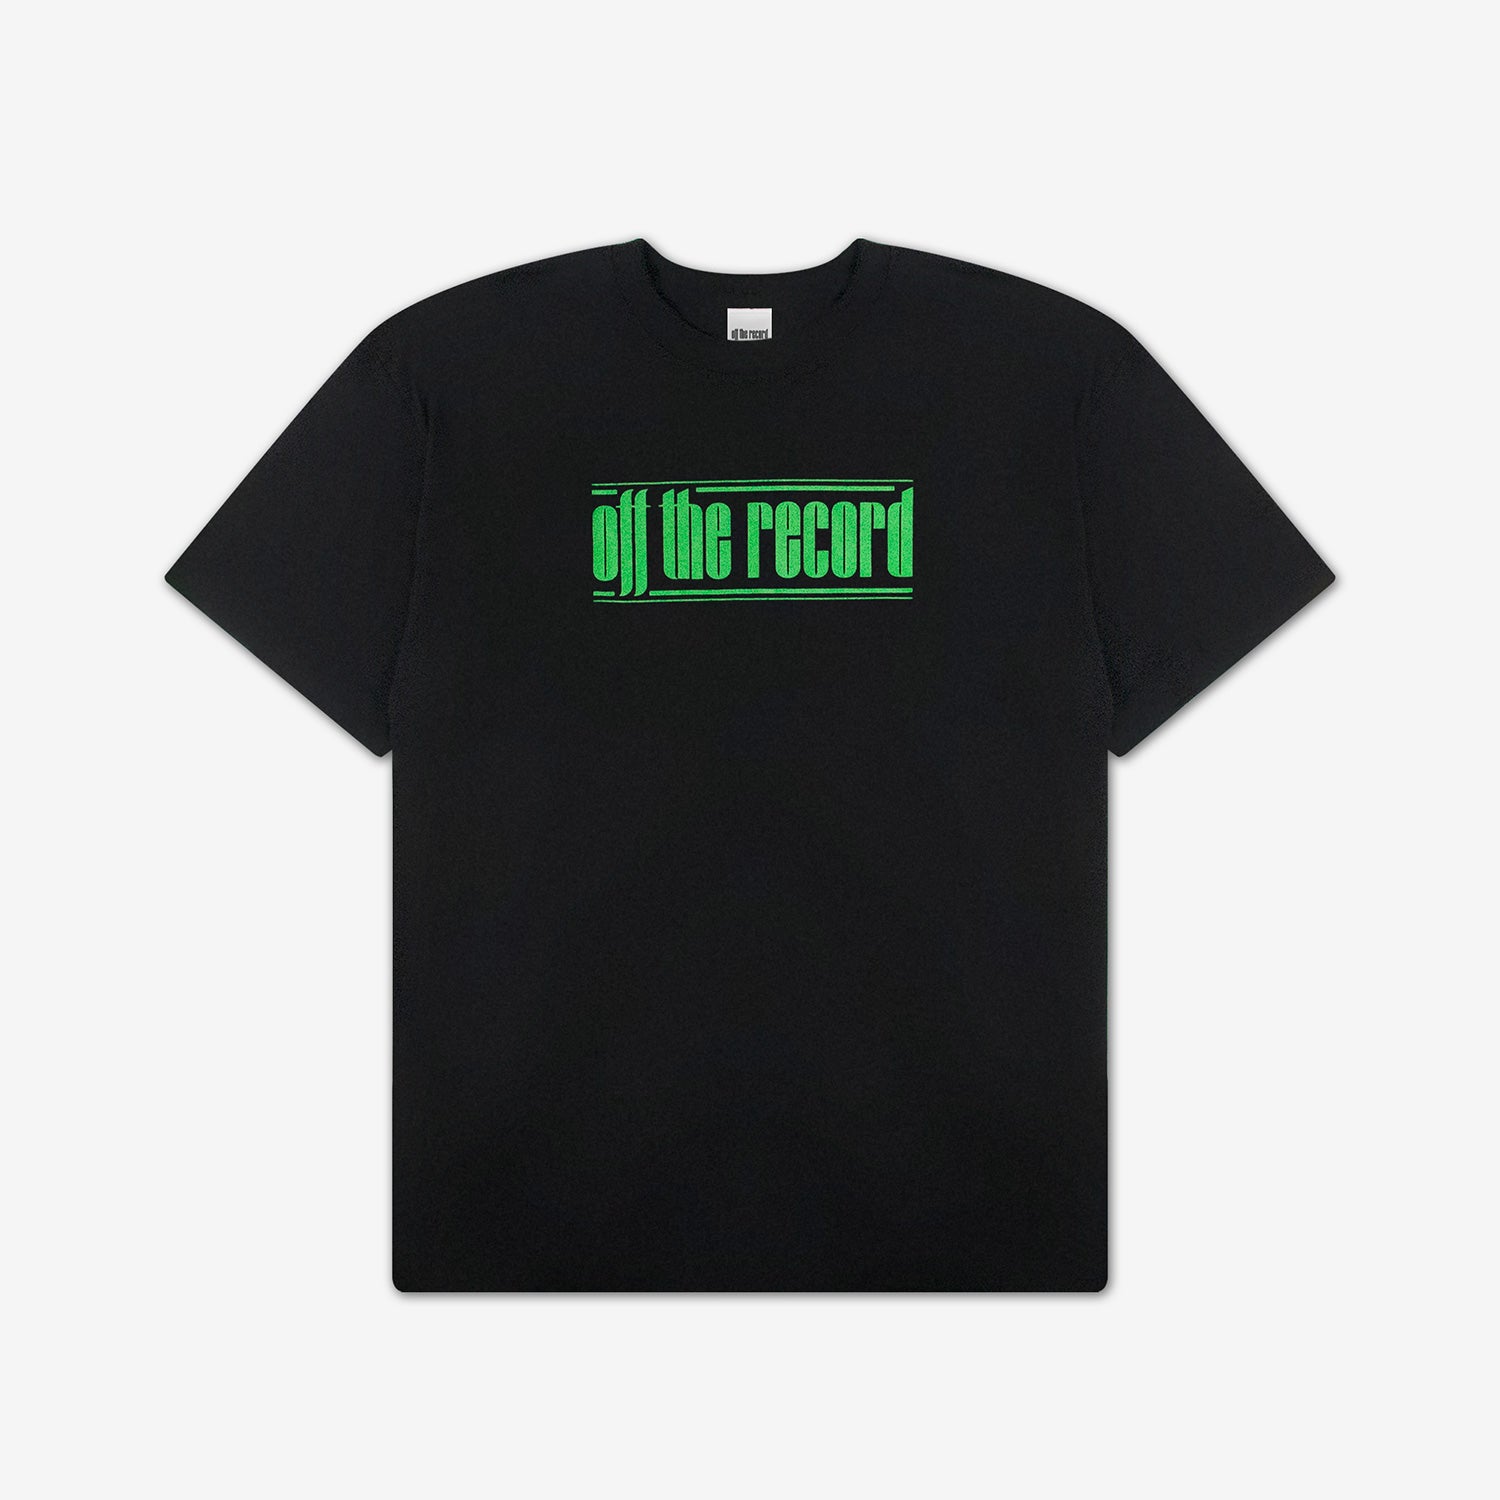 T-SHIRT【M】 / WOOYOUNG (From 2PM)『Off the record』